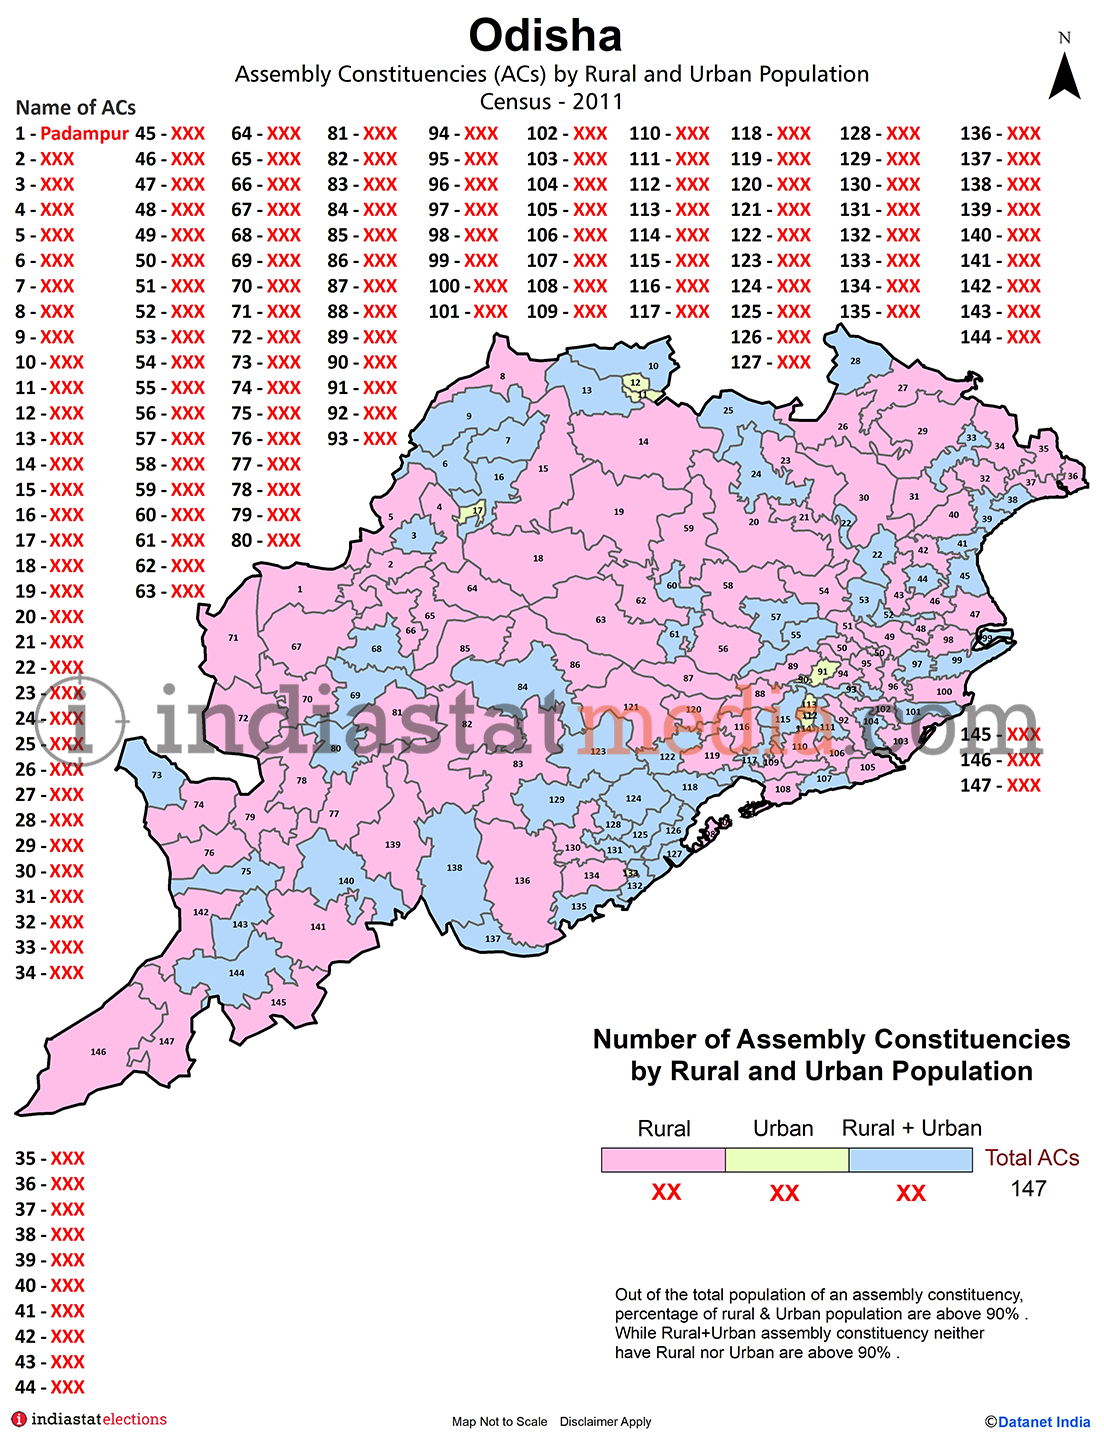 Assembly Constituencies (ACs) by Rural and Urban Population in Odisha - Census 2011